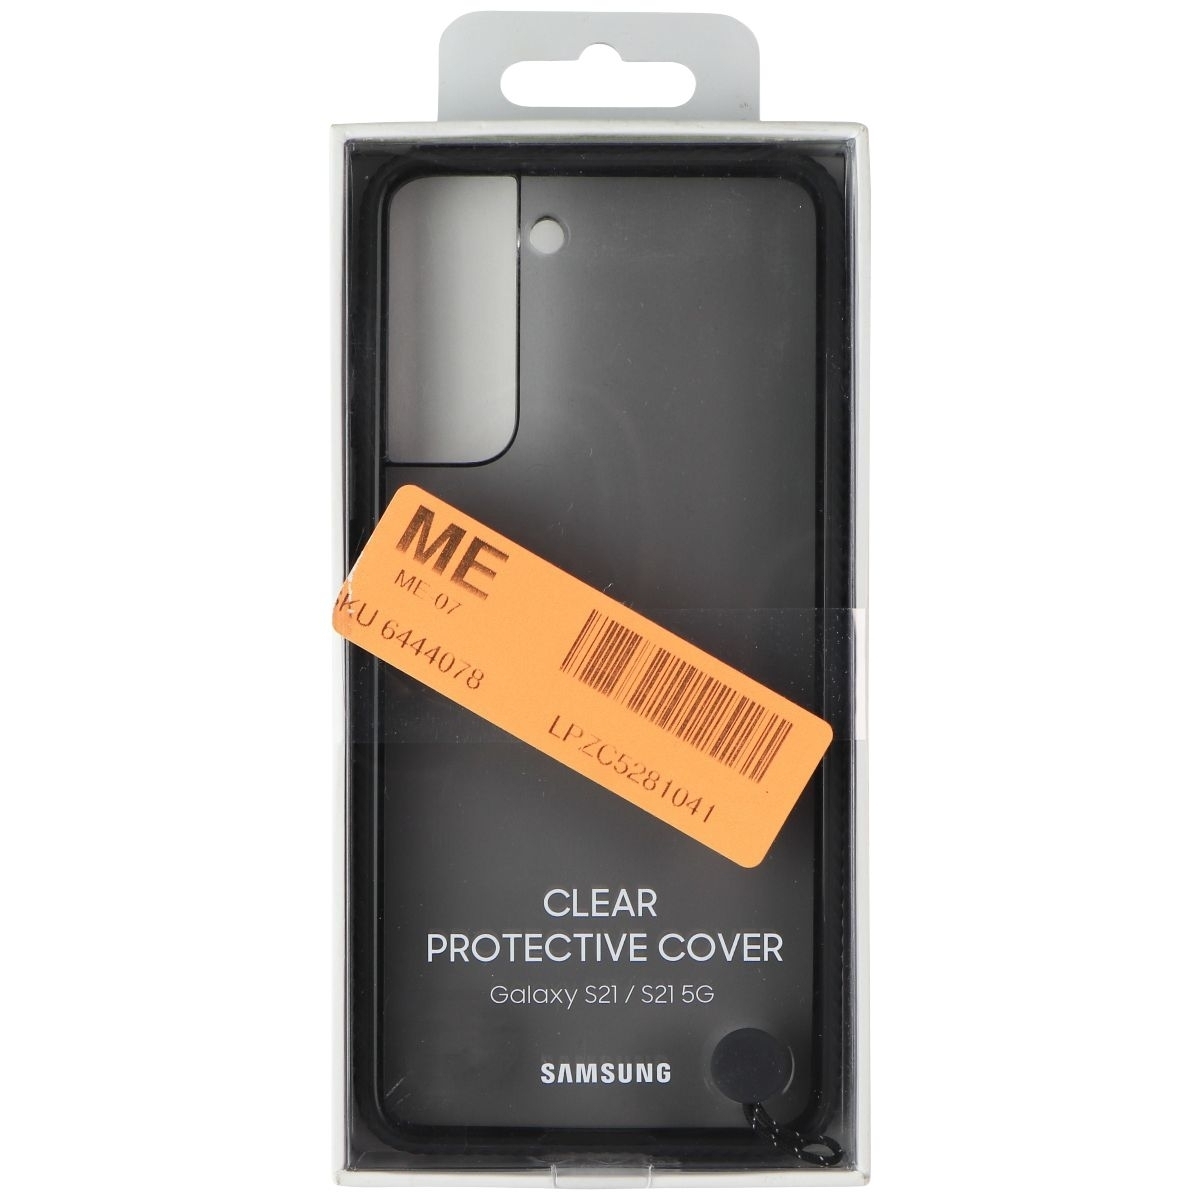 Samsung Clear Protective Cover For Samsung Galaxy S21 / S21 5G - Smoke/Black